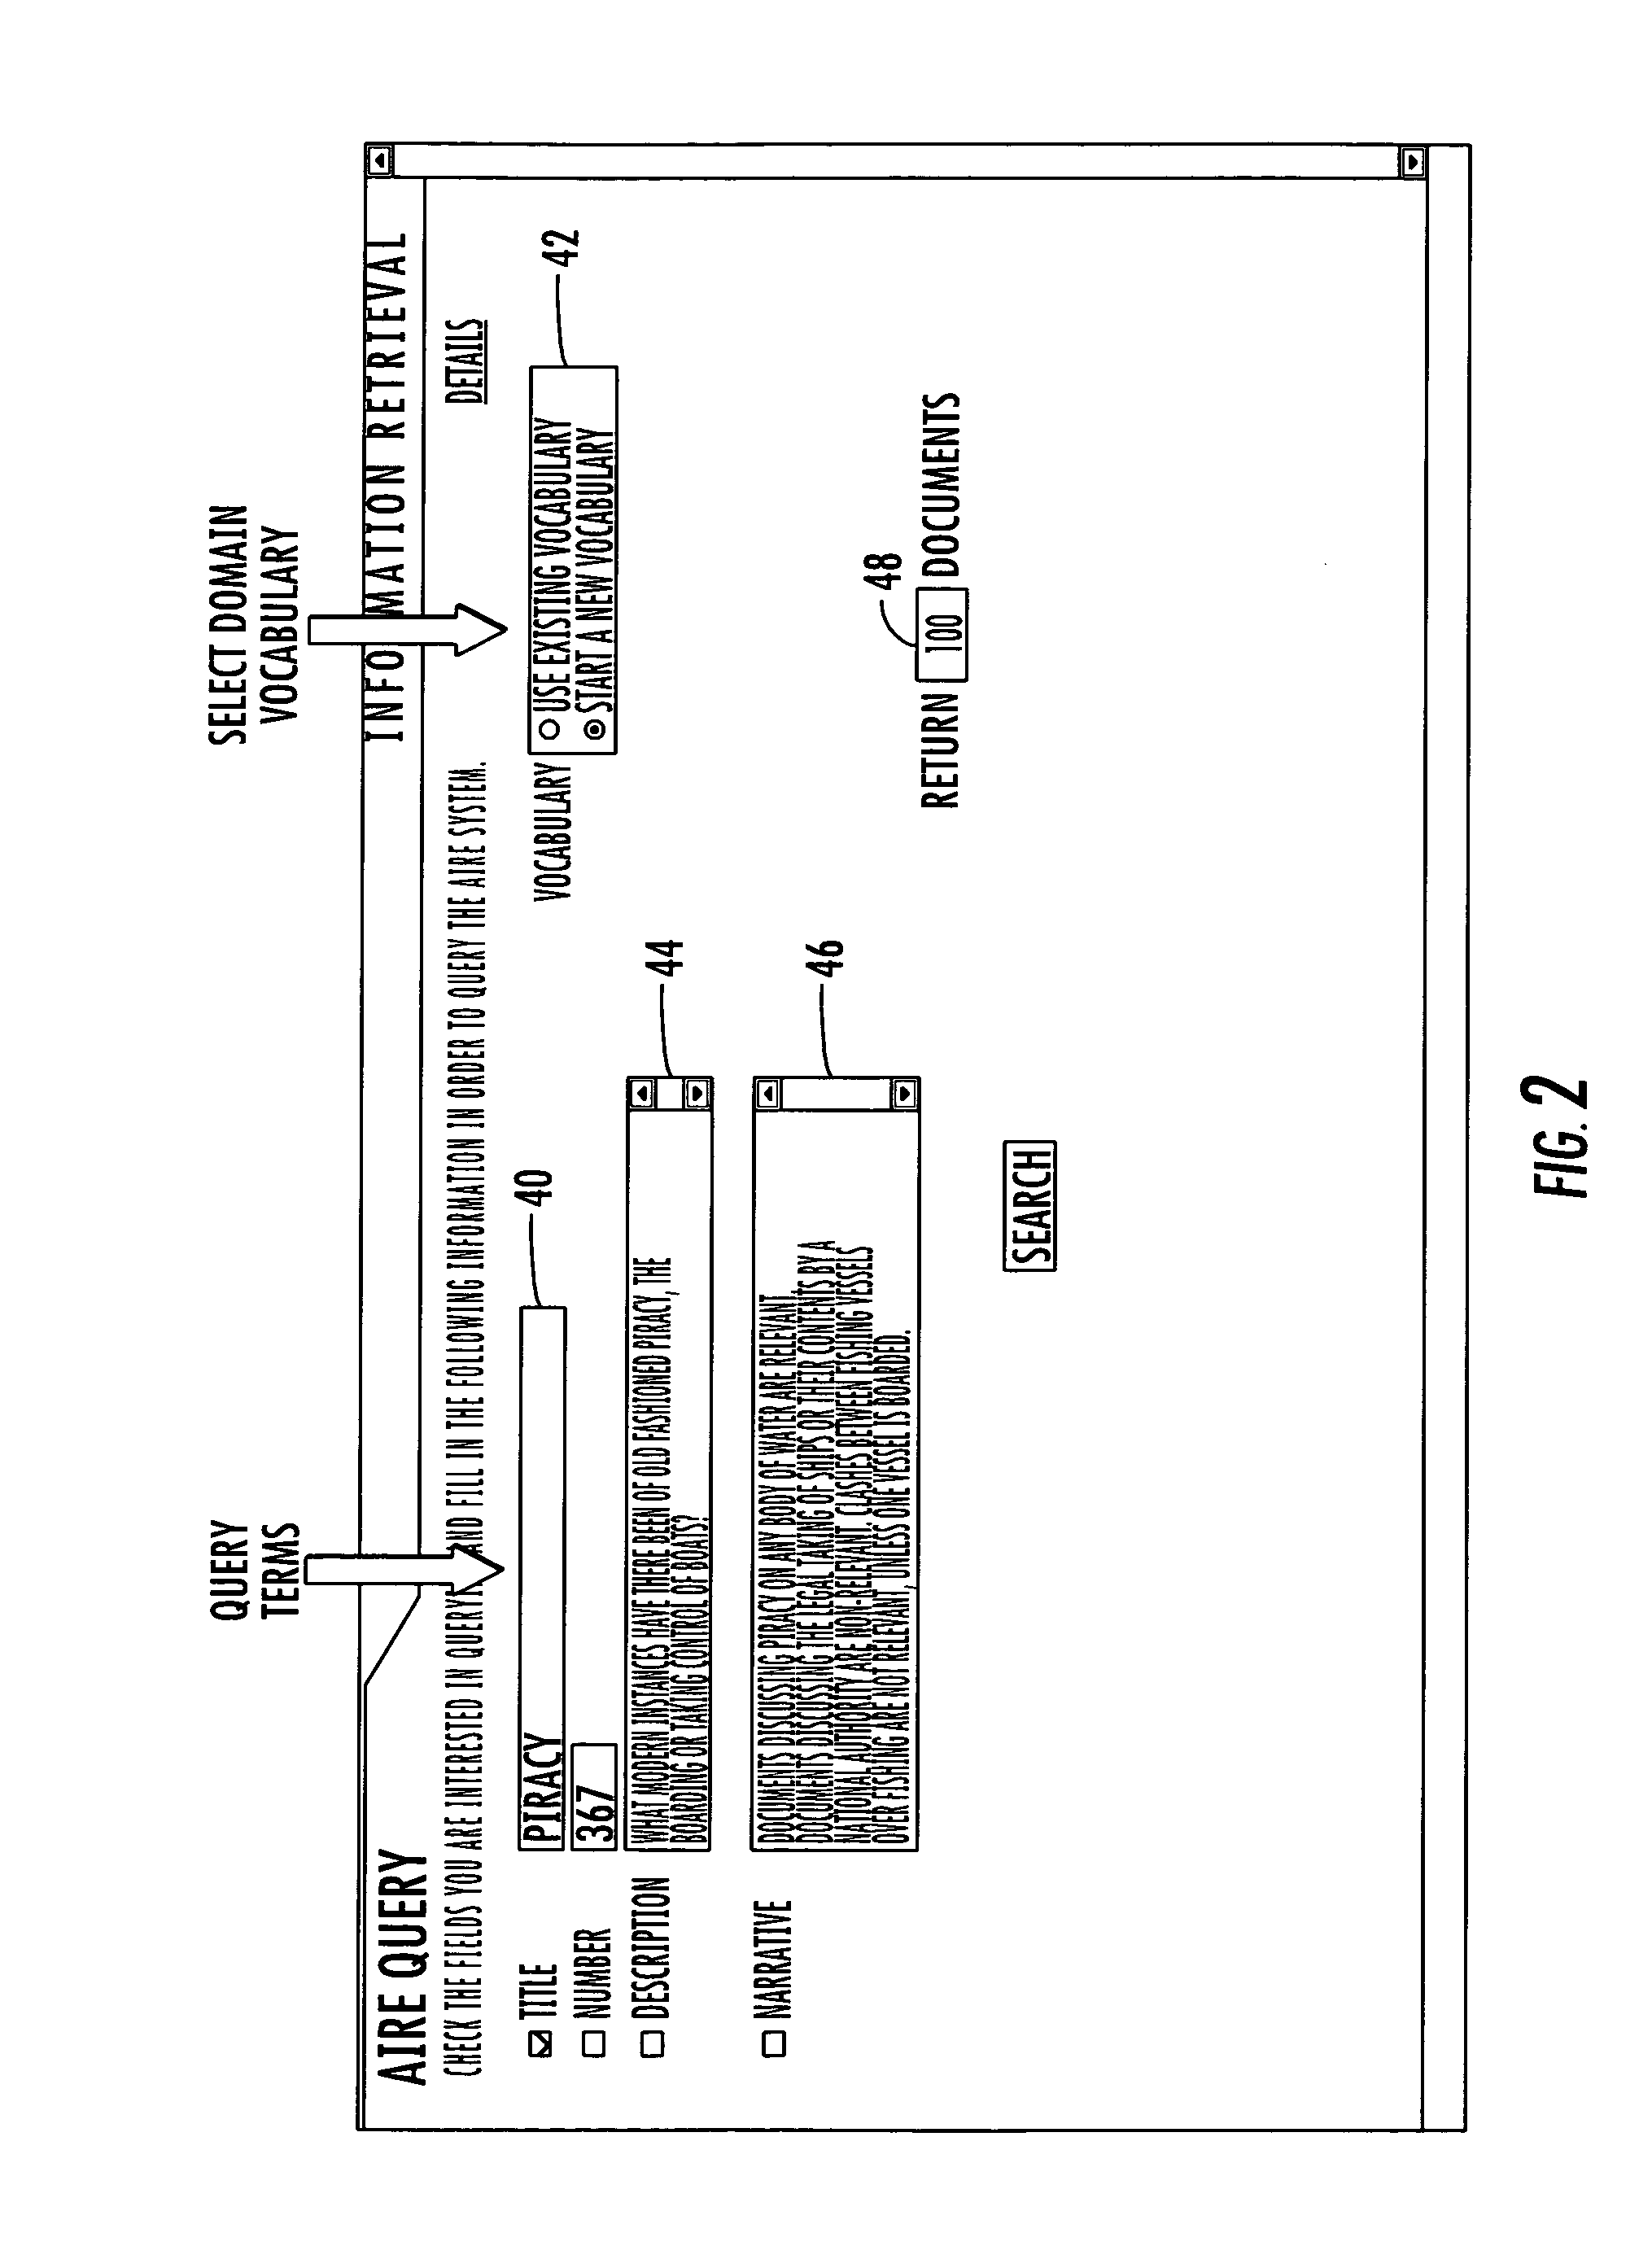 Method for domain identification of documents in a document database